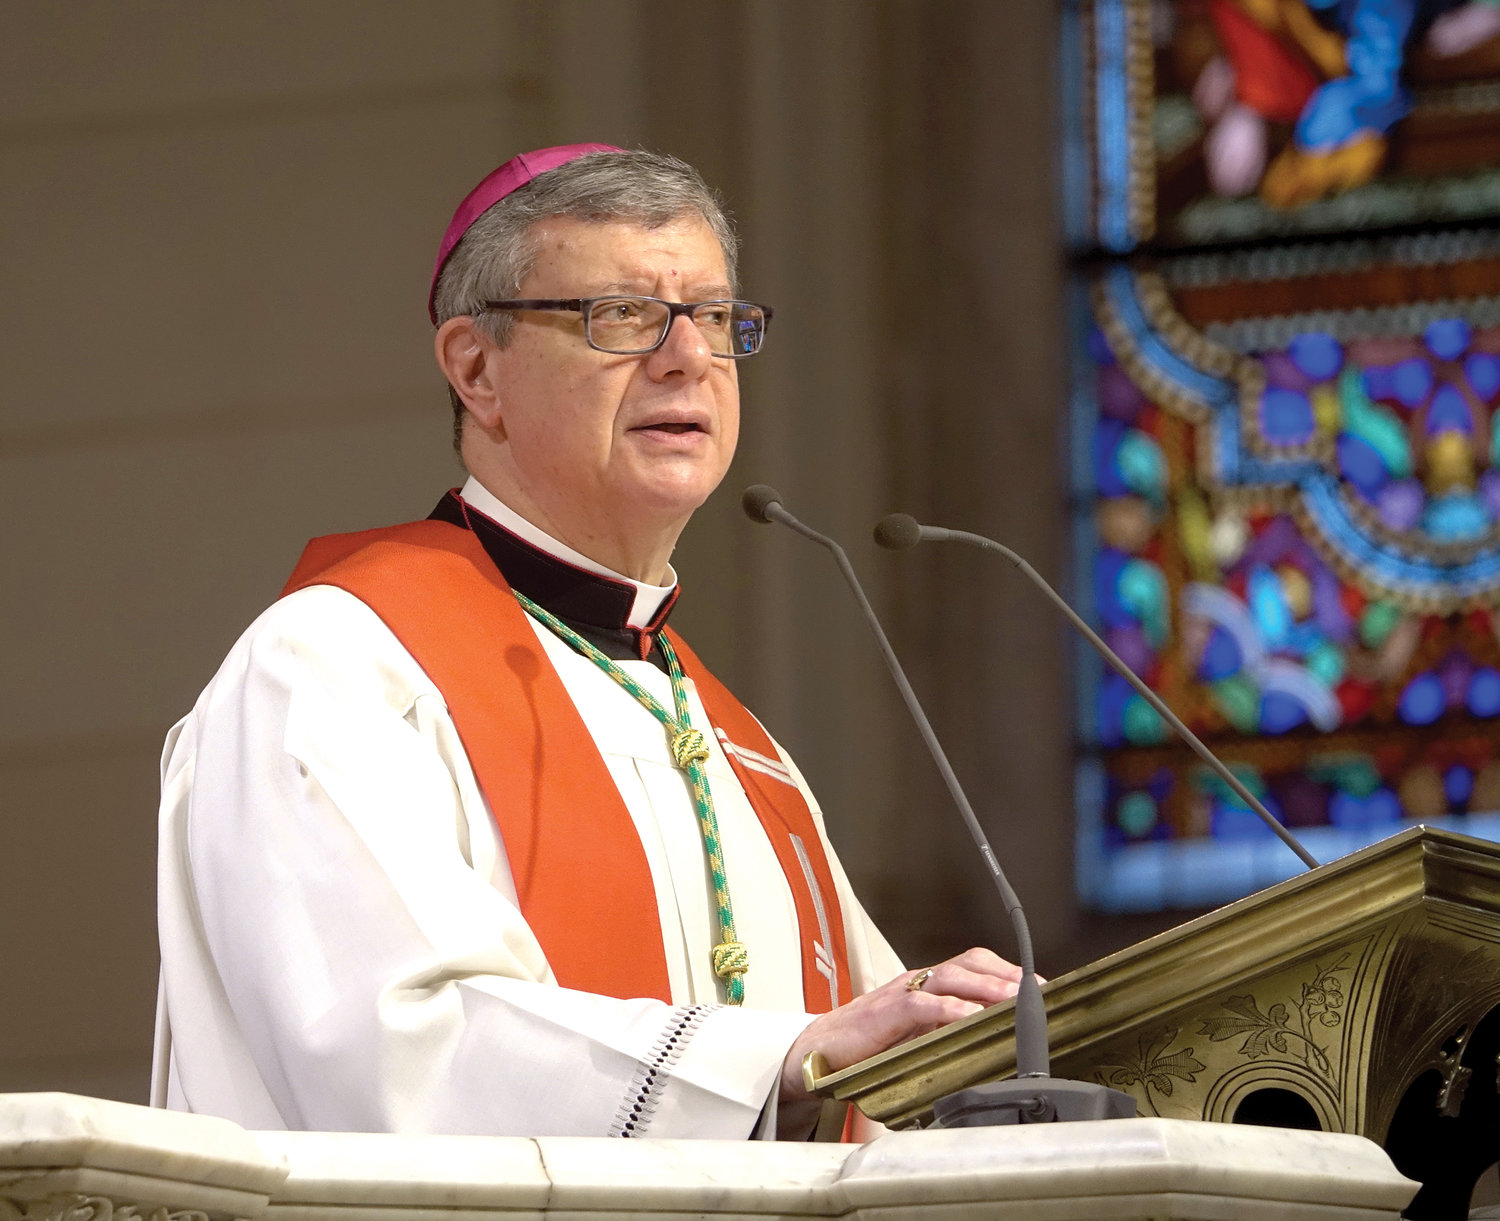 Bishop Gerardo Colacicco delivers the Meditations on the Seven Last Words of Christ on the Cross at the cathedral on Good Friday during the Three Hours’ Reflection on the Passion and Death of Jesus Christ.